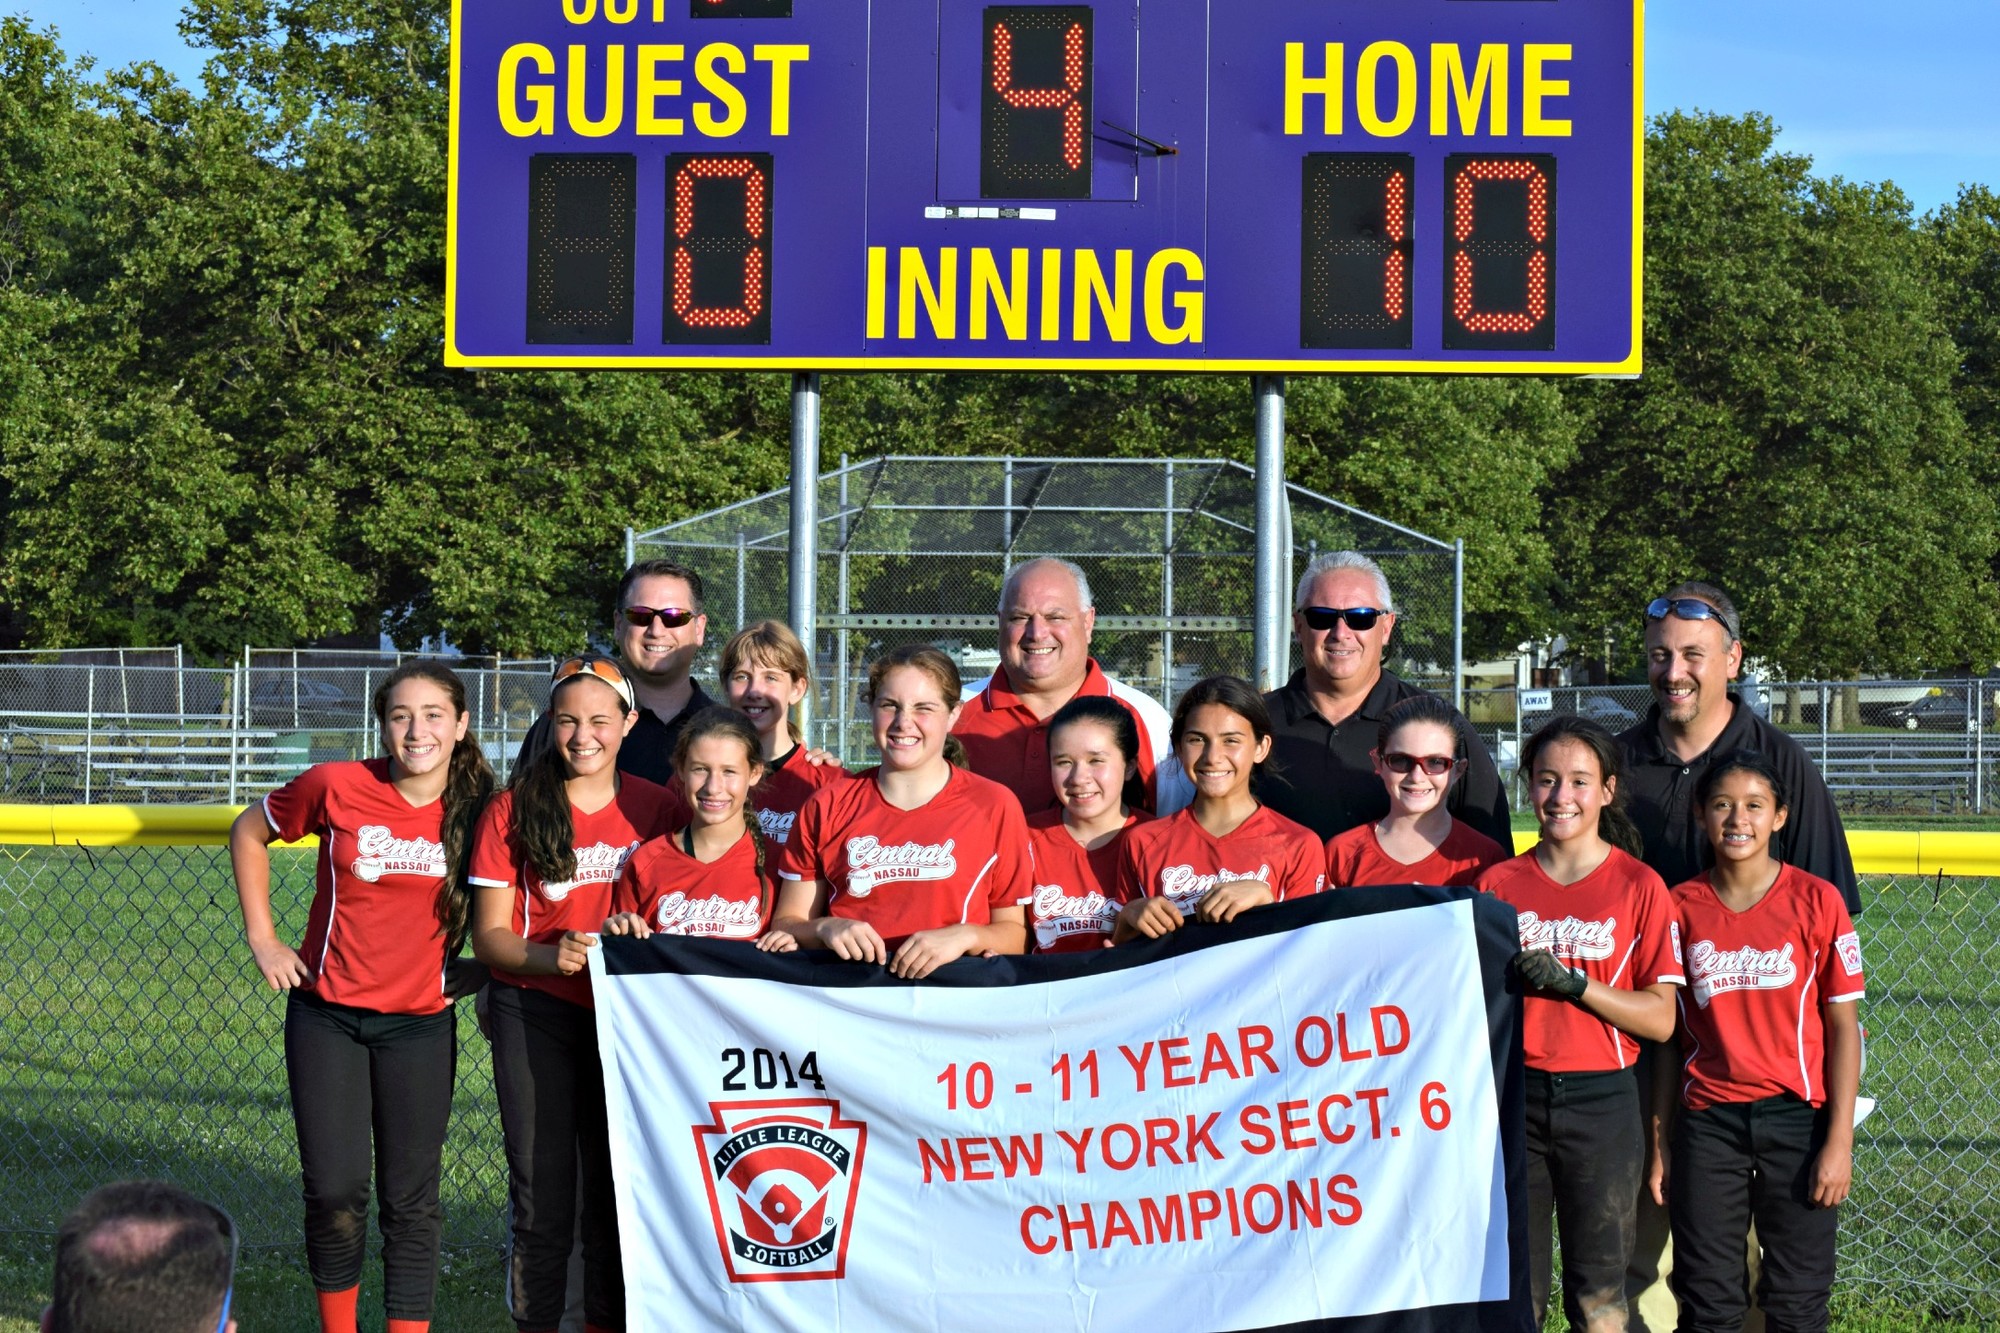 Central Nassau’s U-11 softball team traveled to upstate Chatham last month to represent Salisbury in a state tournament.